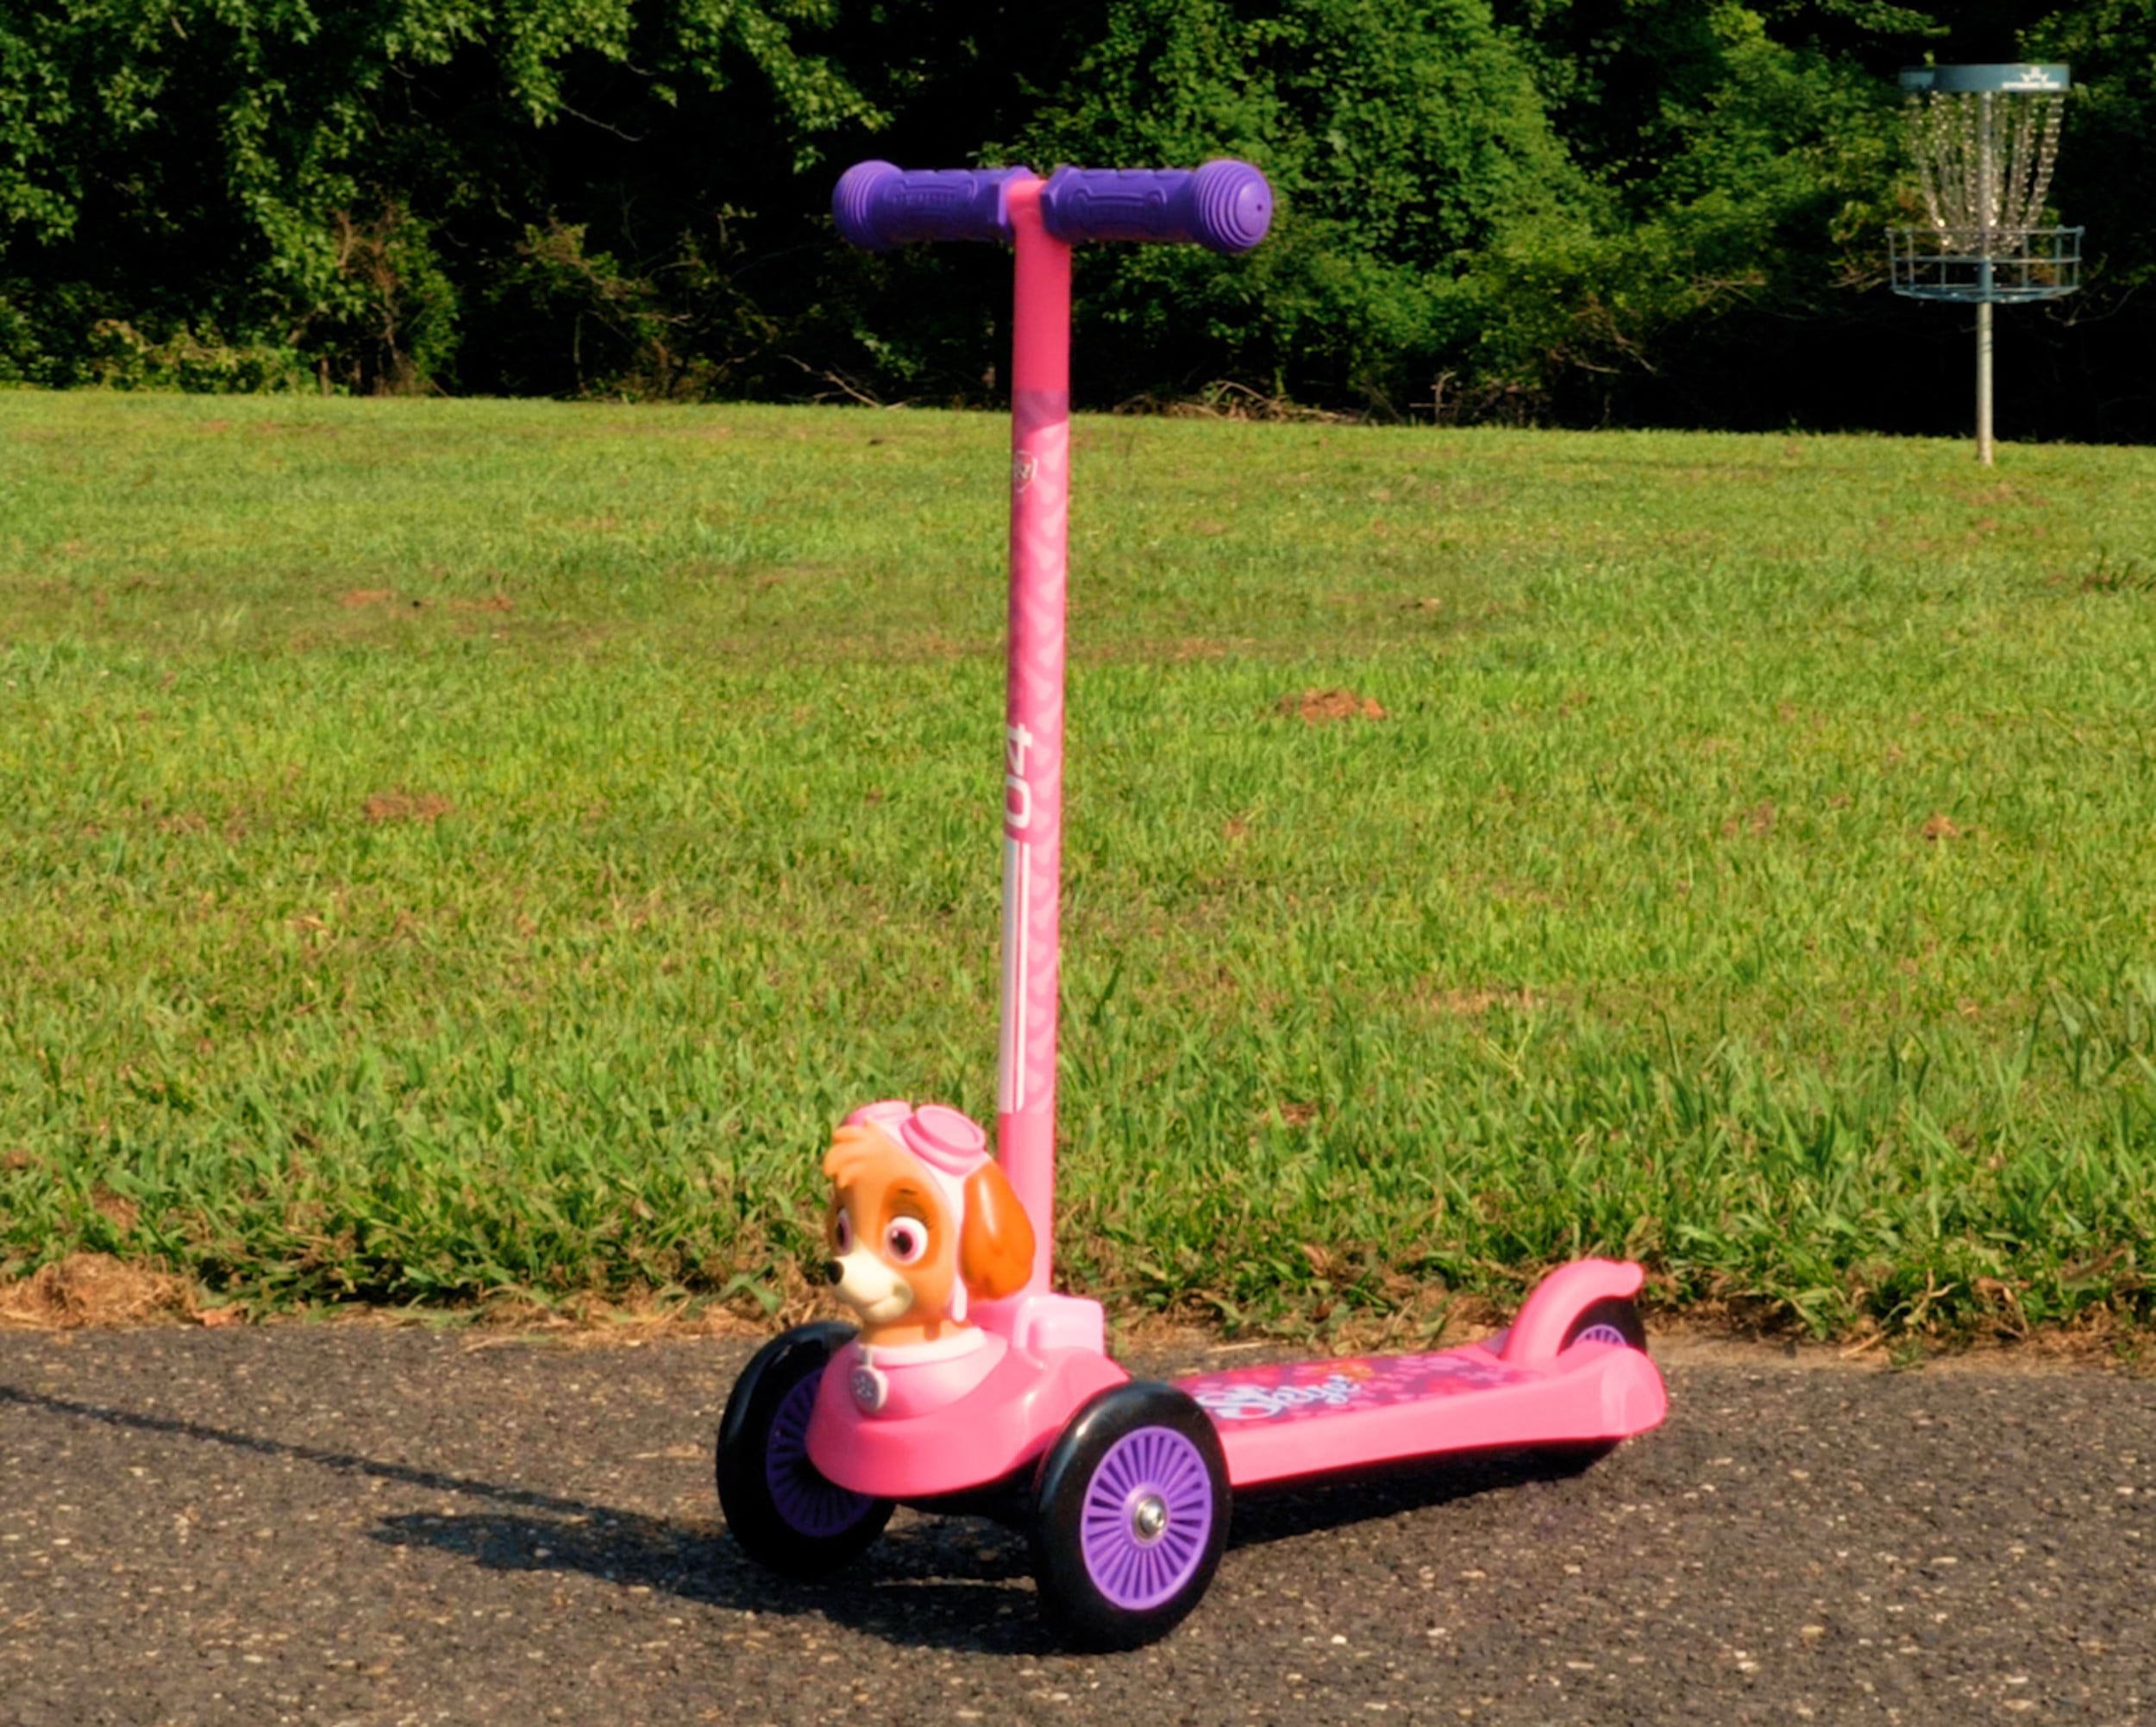 Paw Patrol Skye 3D Scooter with 3 Wheels and Tilt to Turn- Pink, For Girls  Ages 3+, Max Weight 75lbs, Foot-Activated Brakes